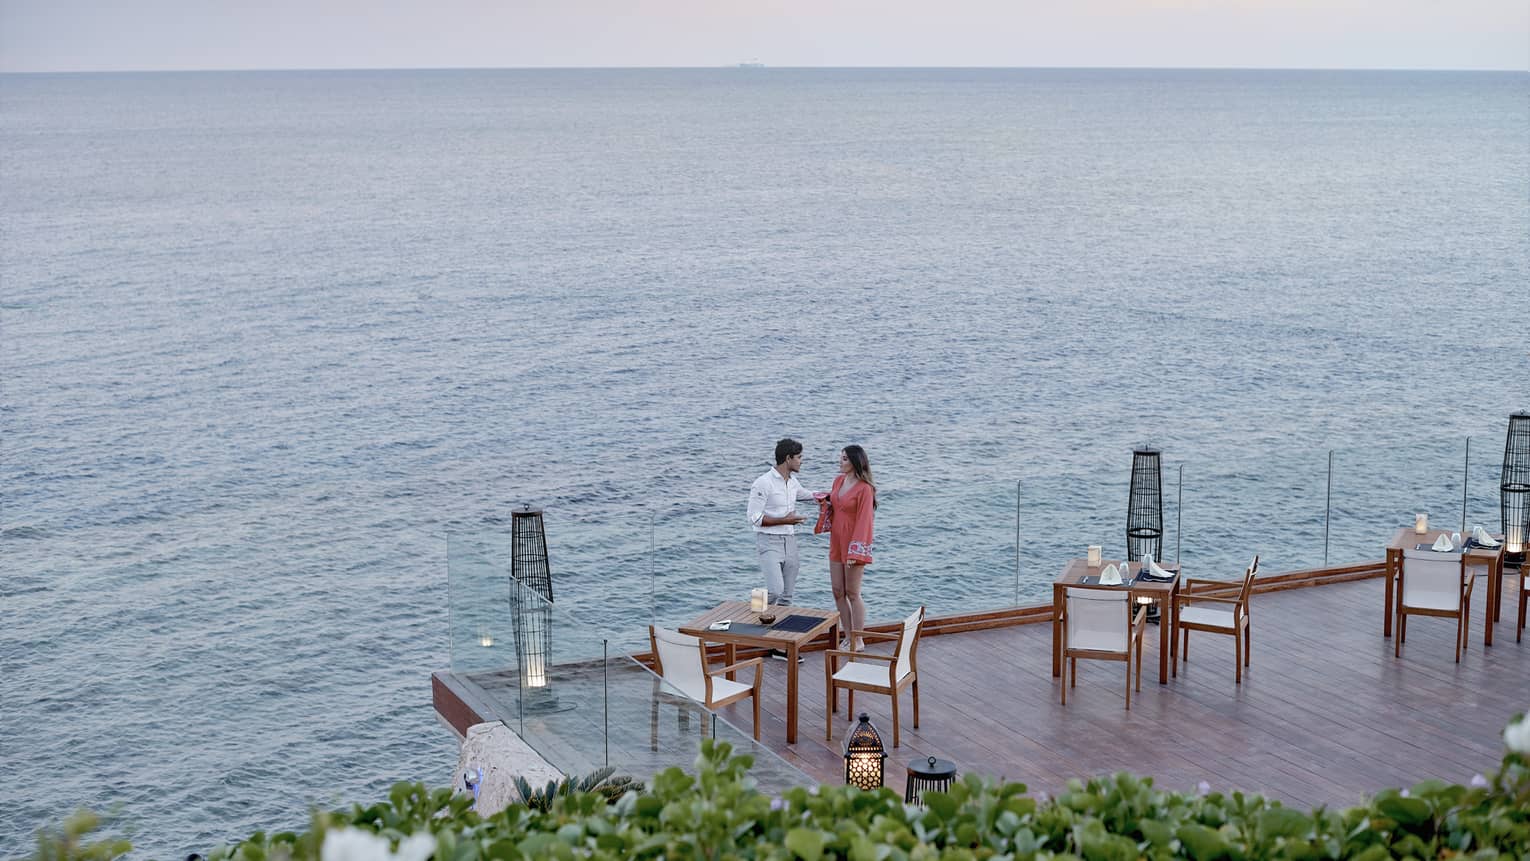 A man and woman talking on an outdoor terrace lined by glass railings, next to sea